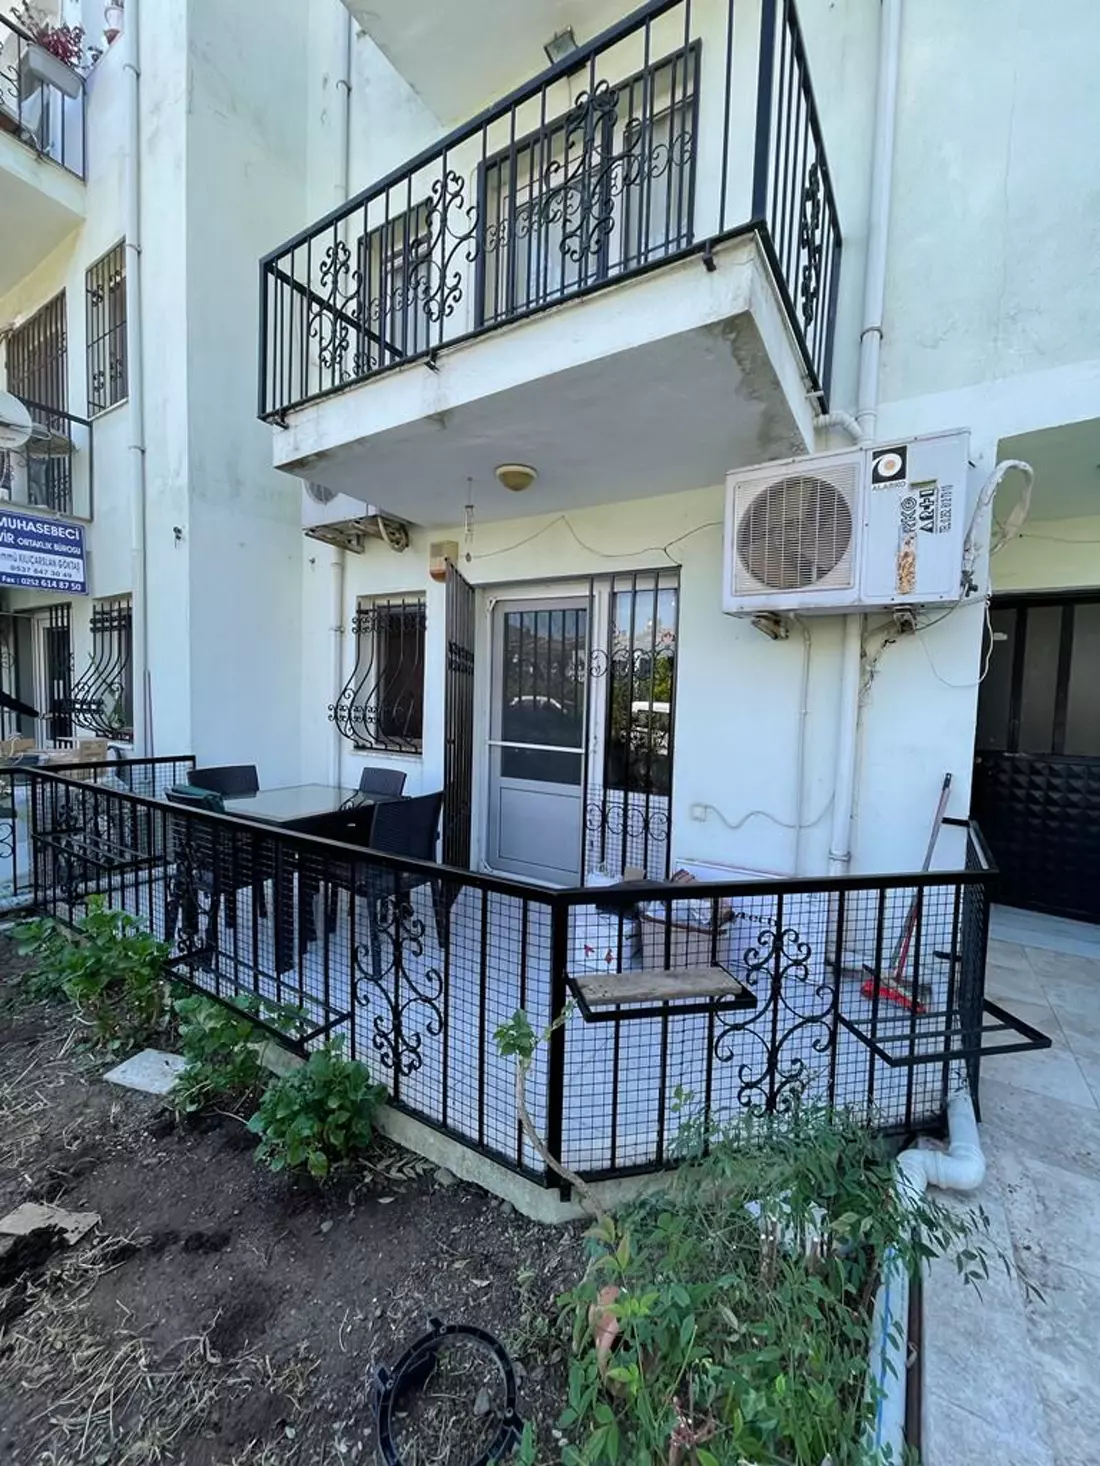 2+1 Ground Floor Apartment For Sale In Fethıye In City Centre